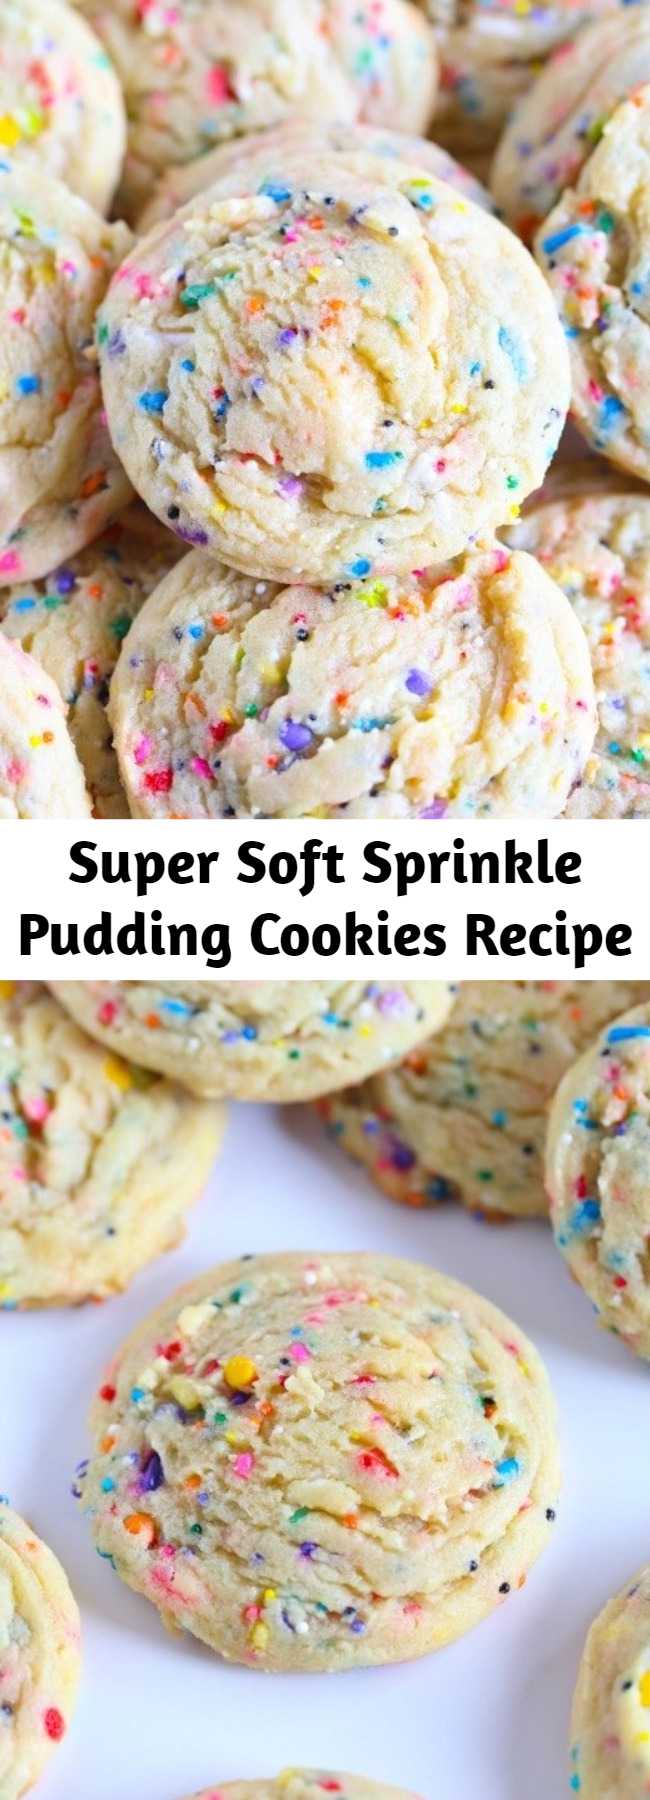 Super Soft Sprinkle Pudding Cookies Recipe - These soft sprinkle sugar cookies are made with a pudding mix! These SUPER SOFT Sprinkle Pudding cookies are so so easy and loaded with vanilla flavor! This is the best sprinkle cookie recipe to make because it’s so easy, buttery, and delicious!